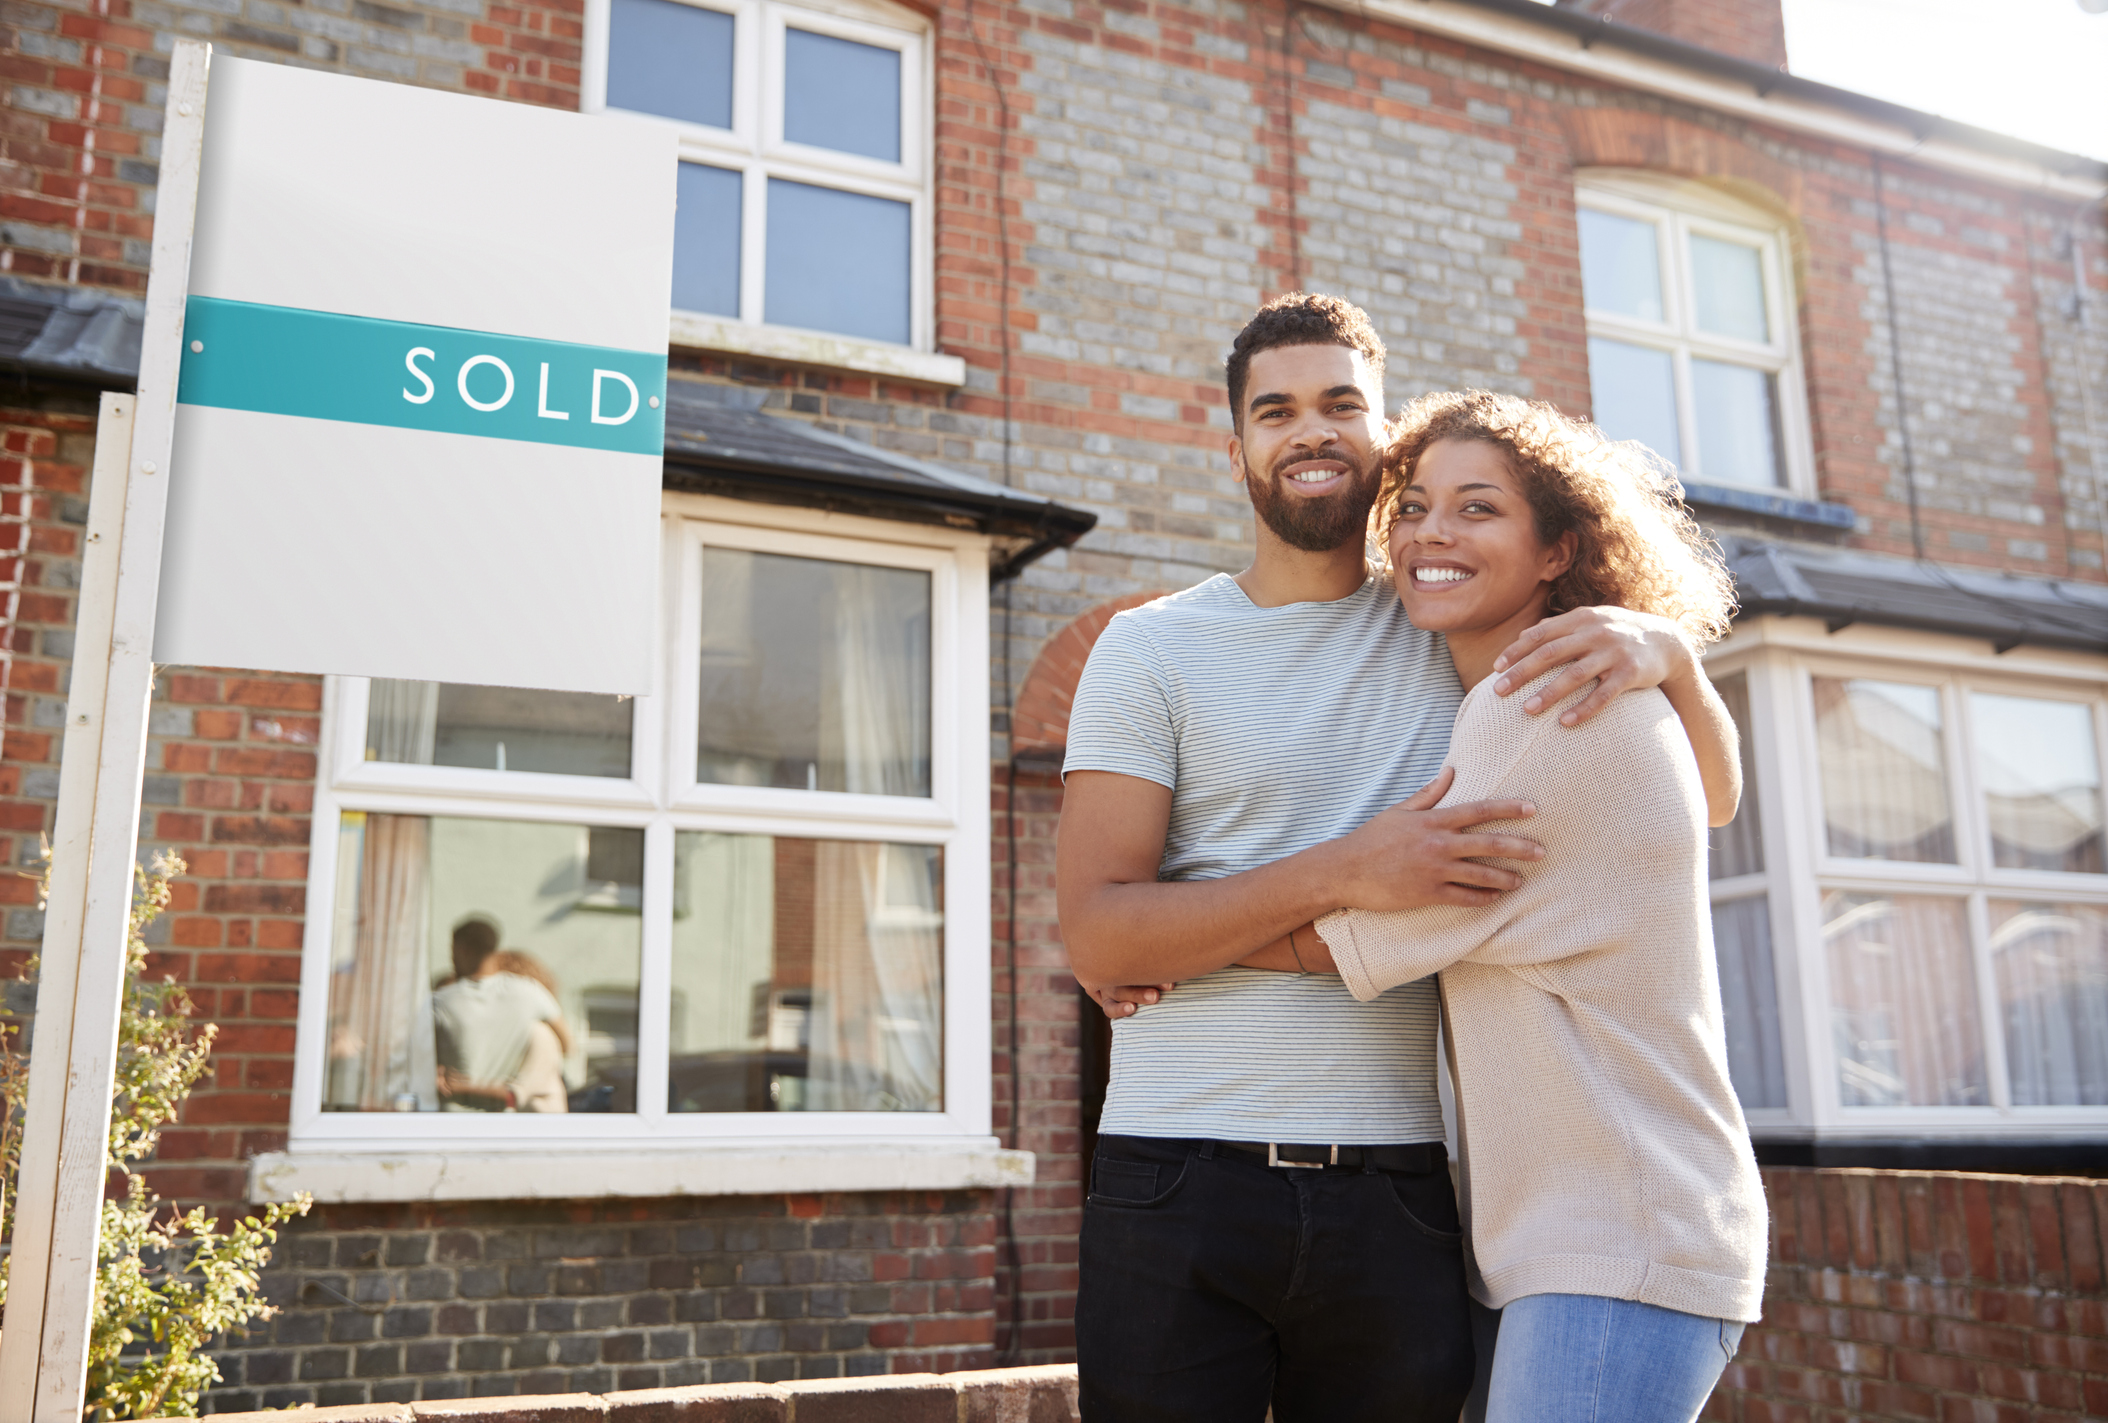 New law sets ground rent to zero for prospective homeowners - https://roomslocal.co.uk/blog/new-law-sets-ground-rent-to-zero-for-prospective-homeowners #sets #ground #rent #zero #prospective